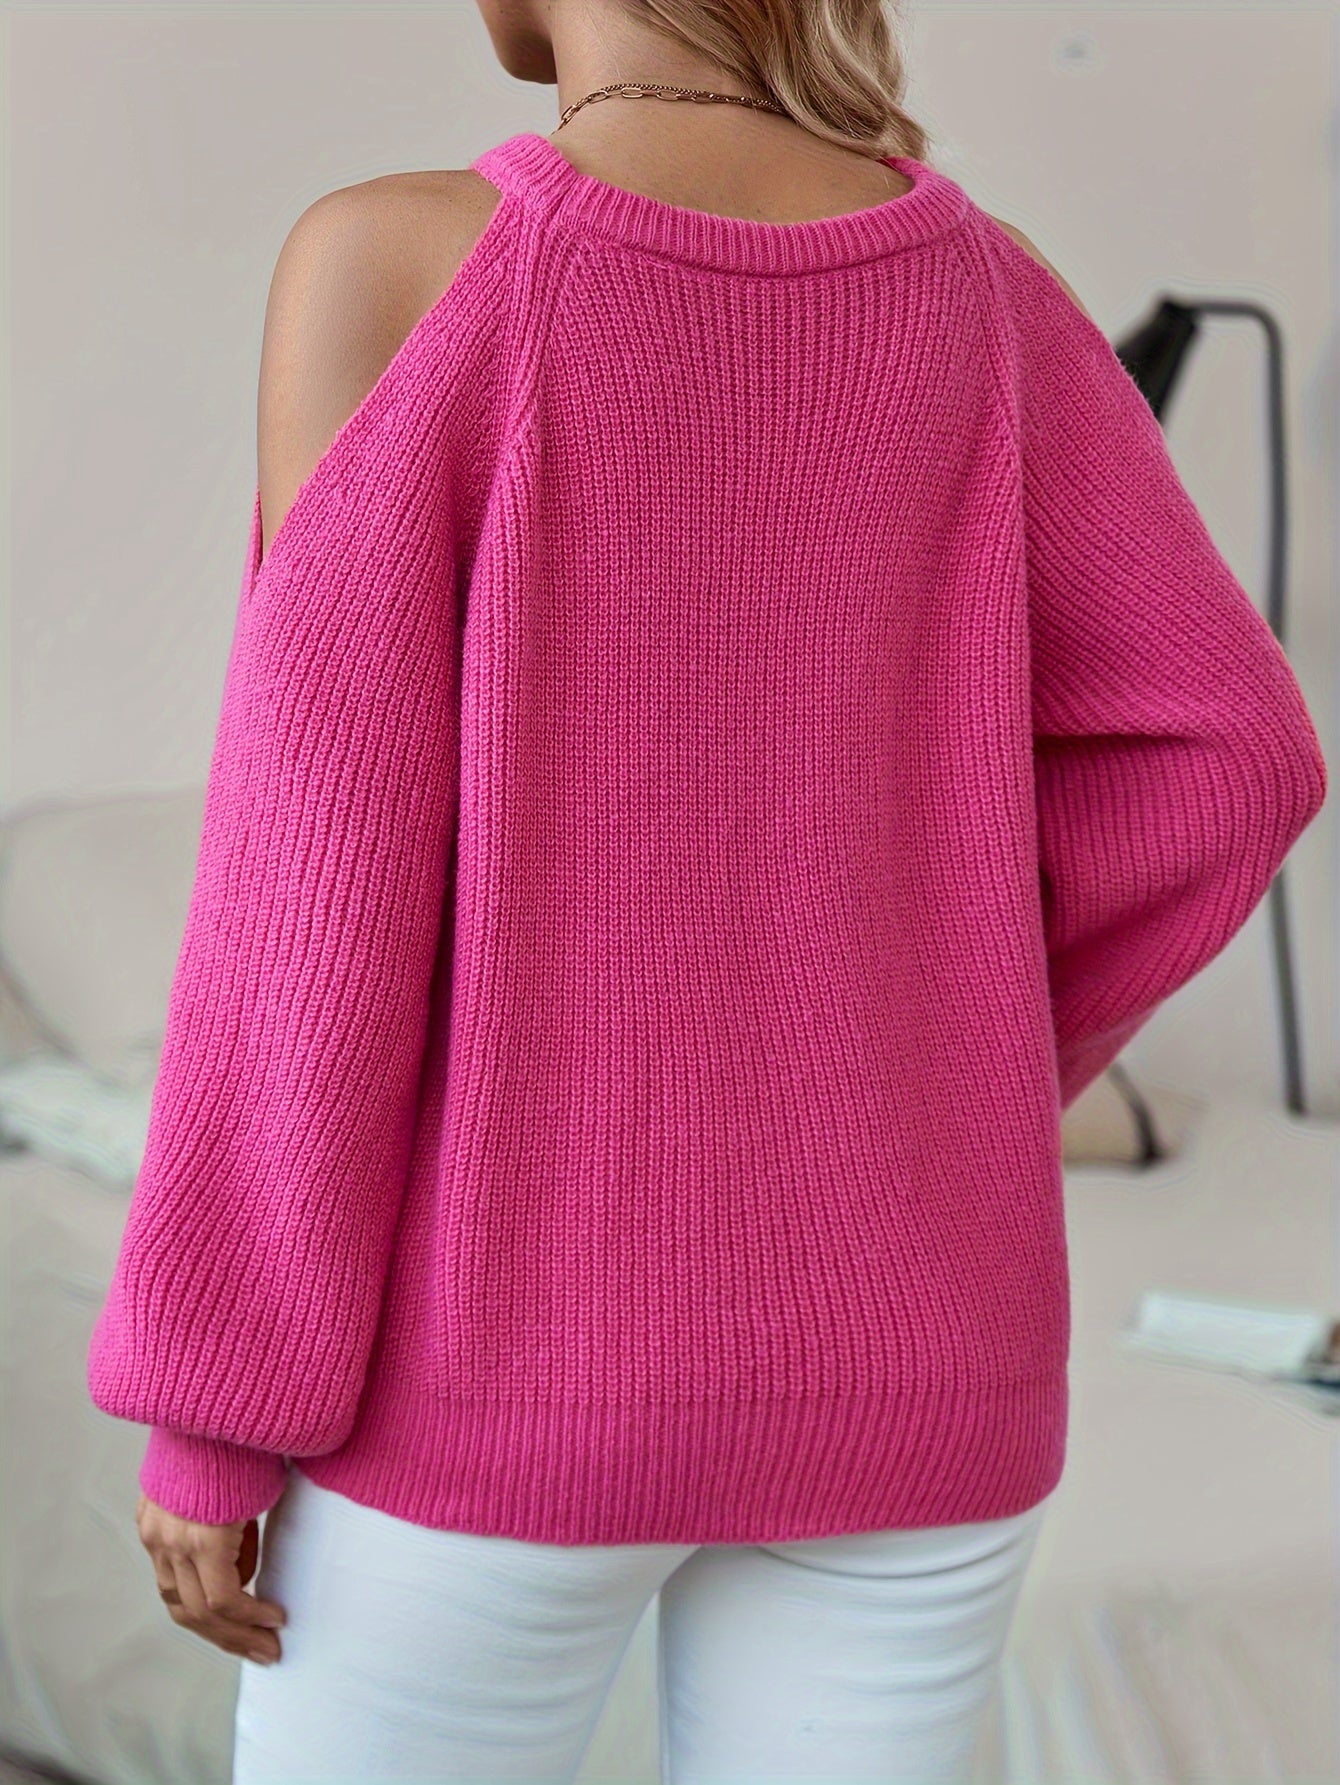 vlovelaw  vlovelaw  Solid Cold Shoulder Cable Knit Sweater, Casual Crew Neck Long Sleeve Sweater, Women's Clothing